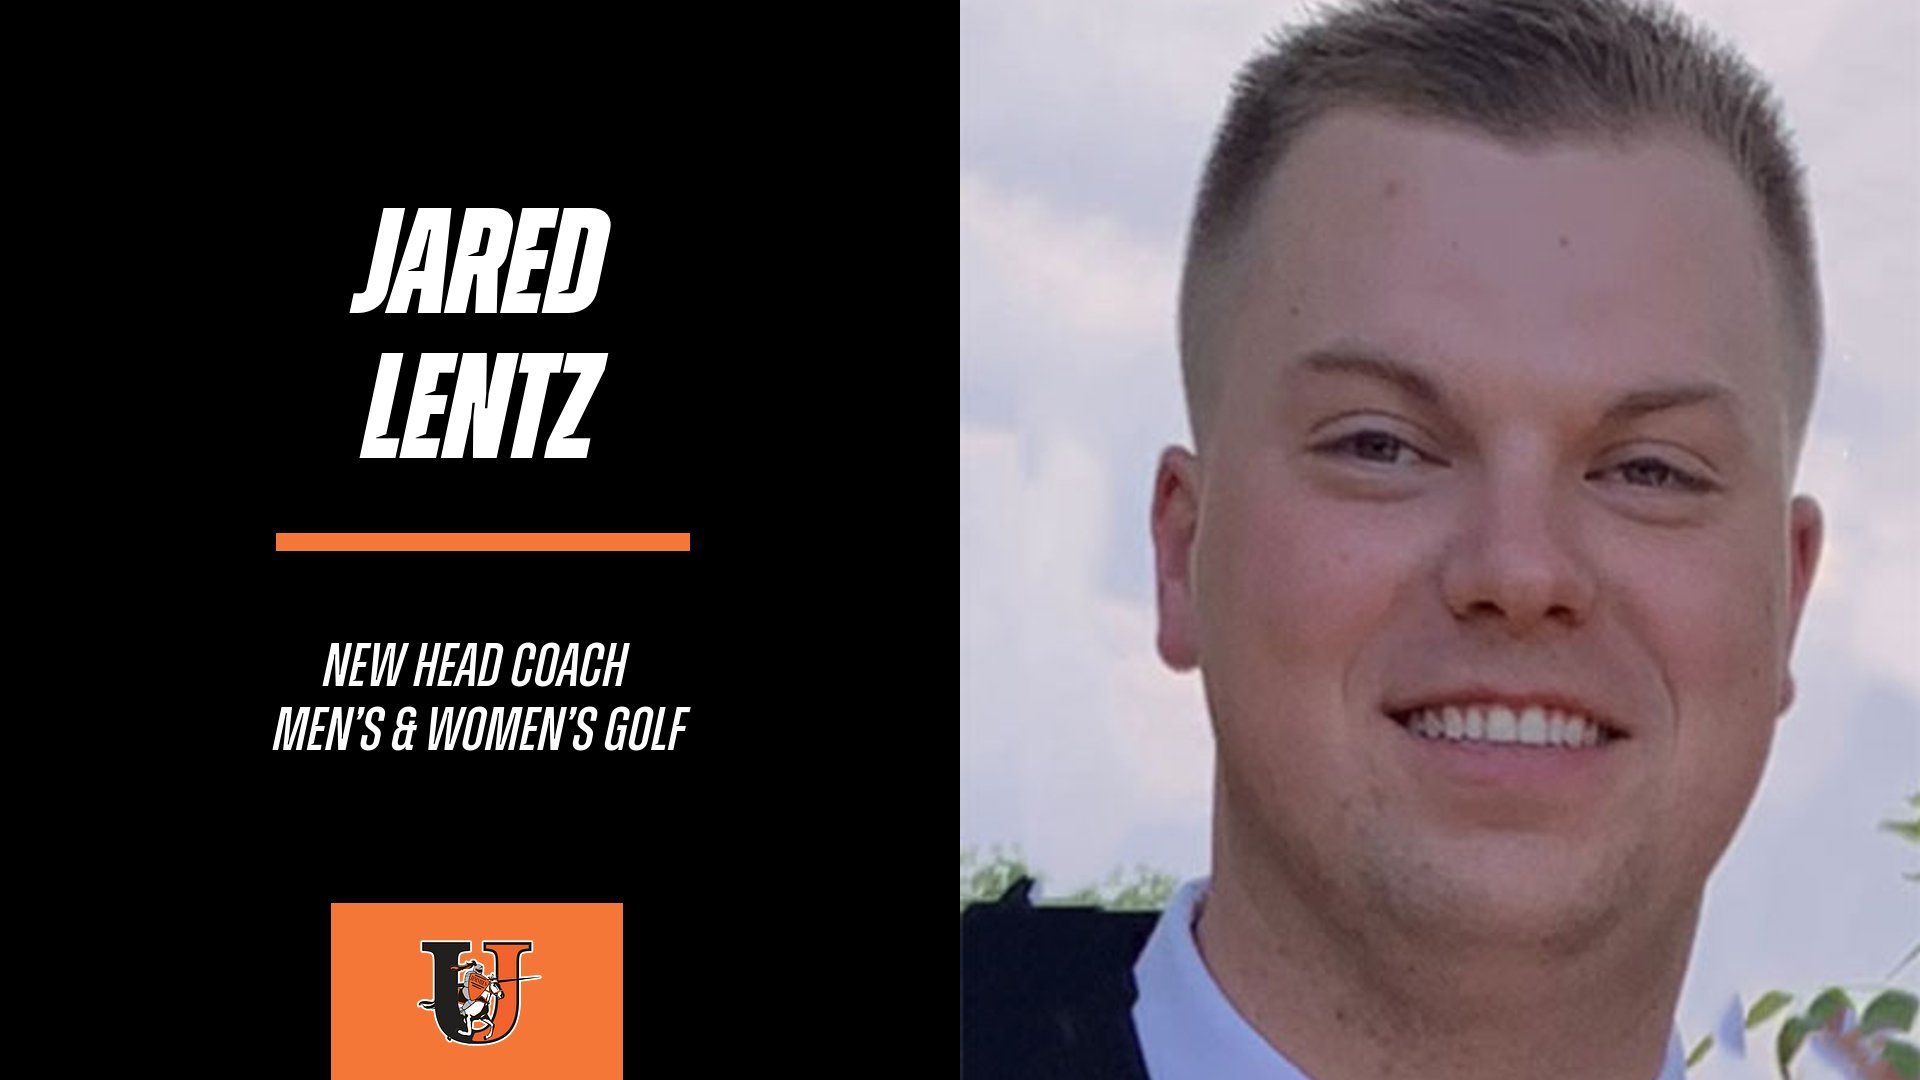 Jared Lentz named new head coach of Jimmie men's and women's golf